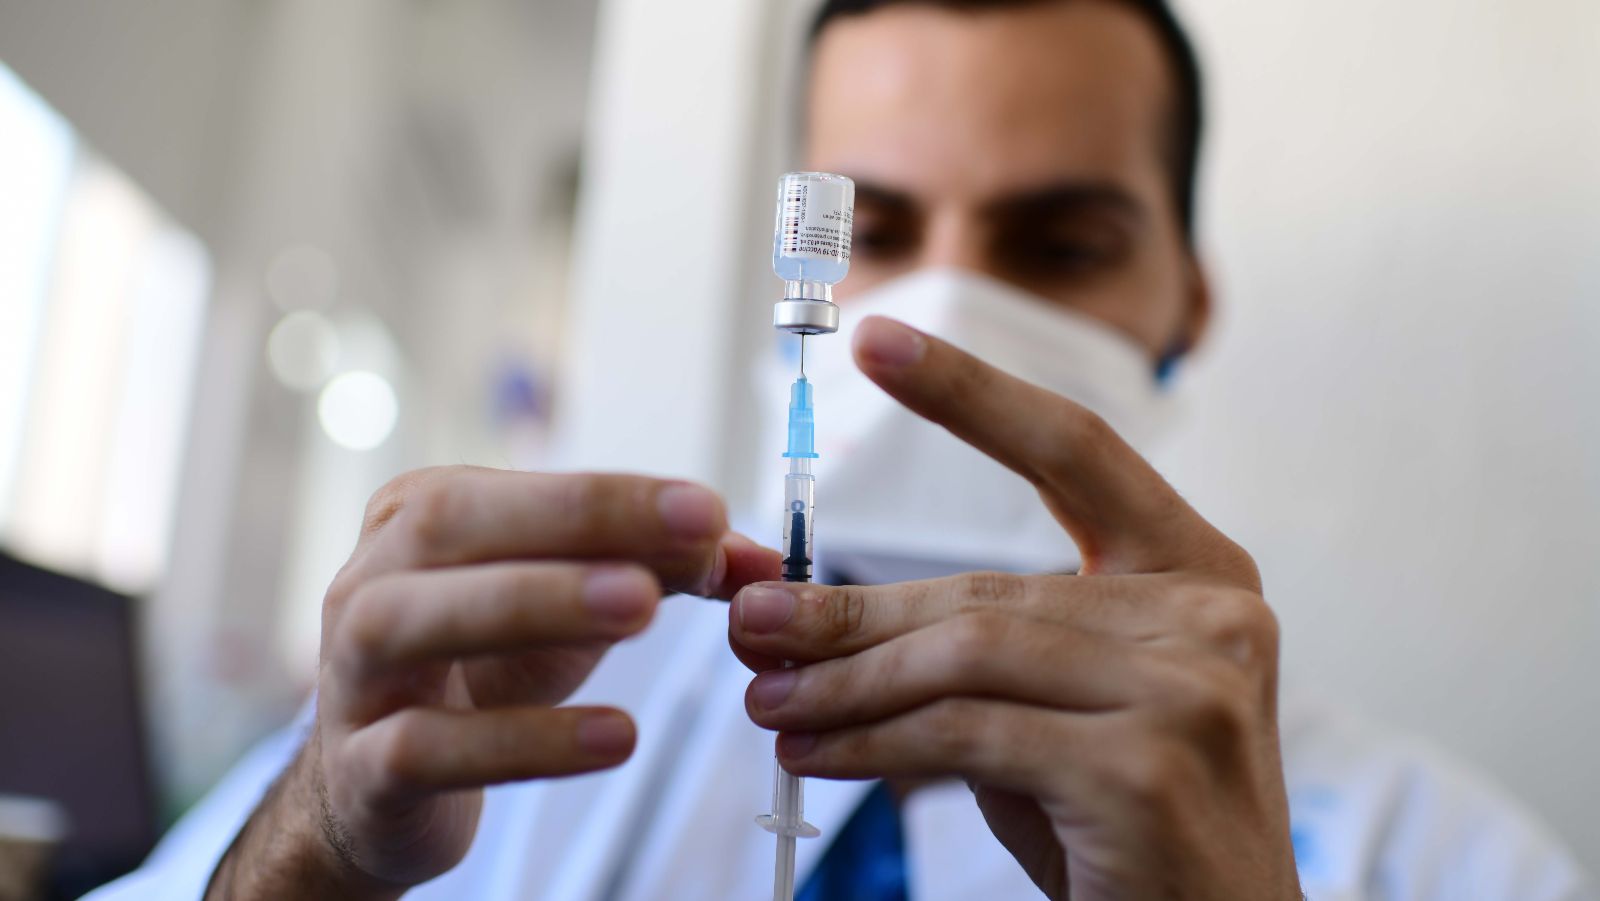 A healthcare worker readies a Covid-19 vaccine in Tel Aviv in February 2021. Photo by Tomer Neuberg/Flash90